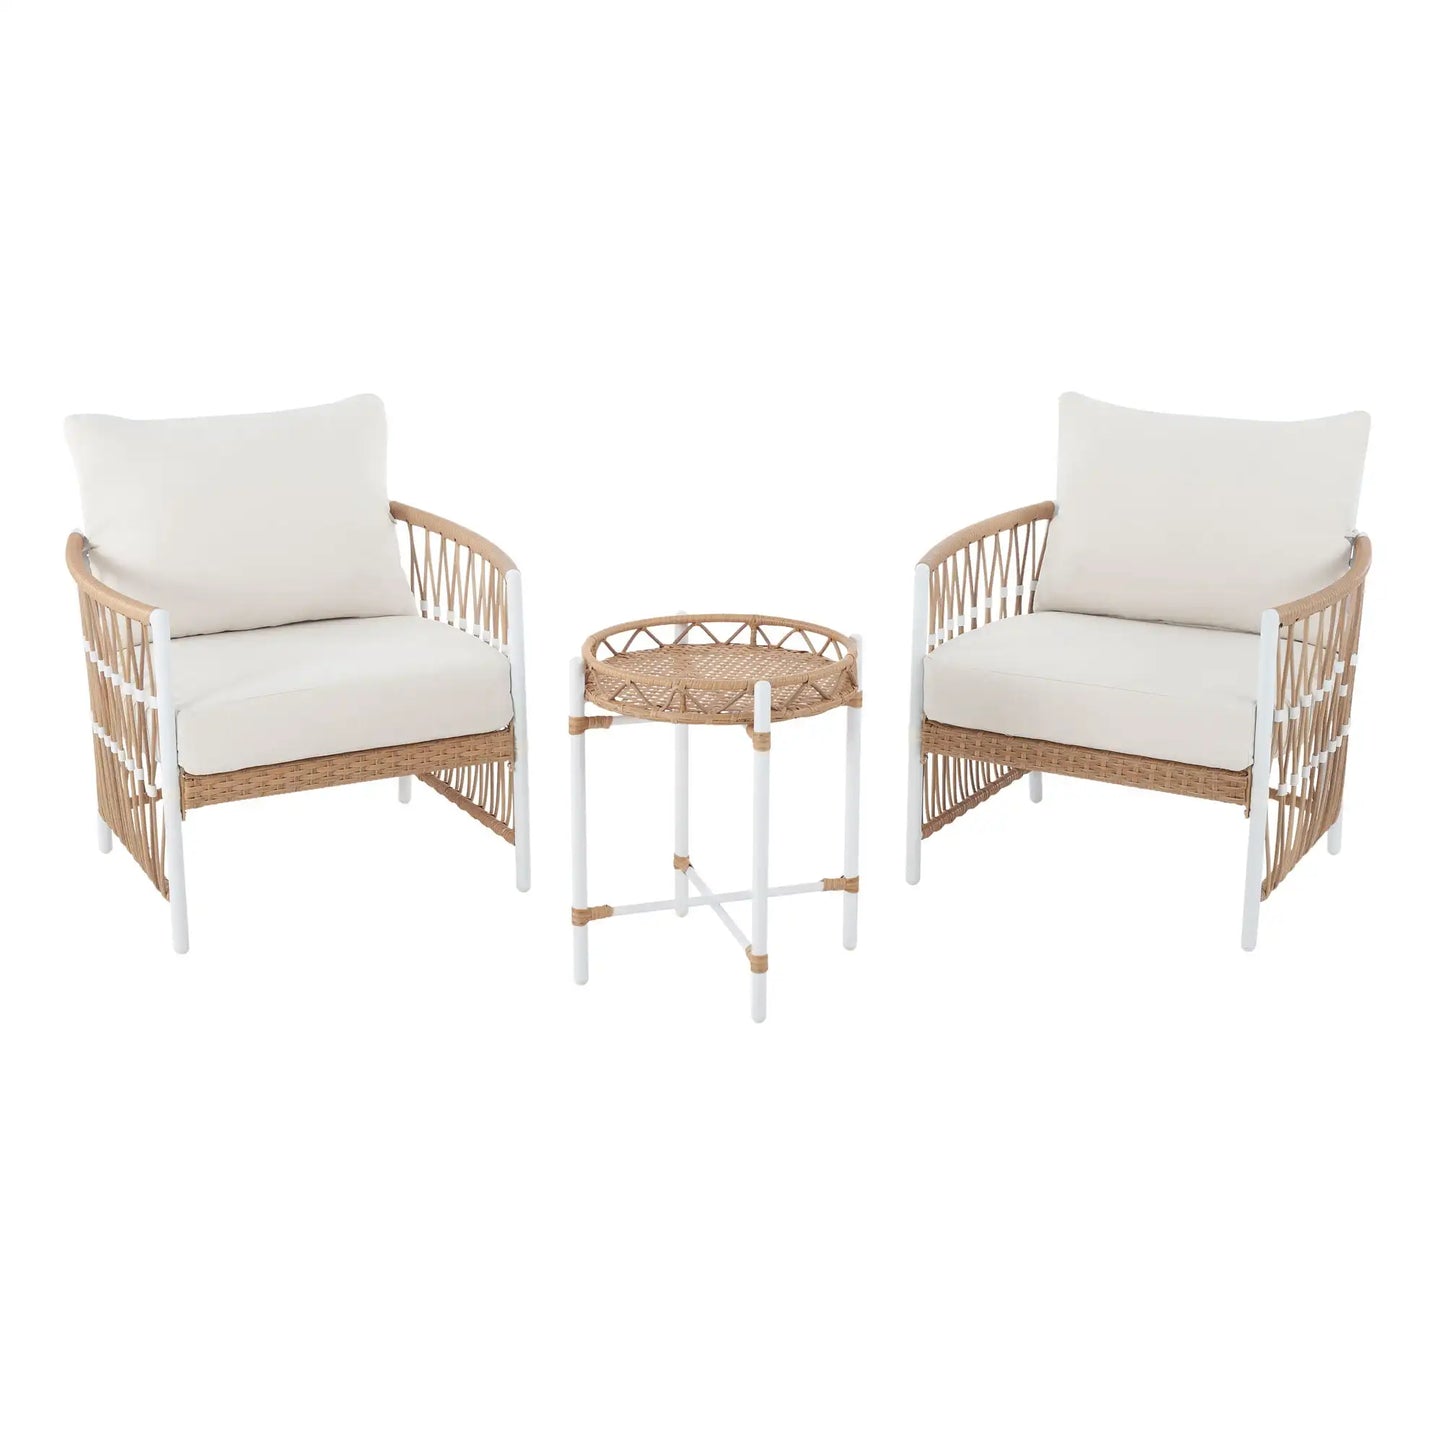 Luxury Outdoor Wicker 3-Piece Stationary Chat Set, Off-White